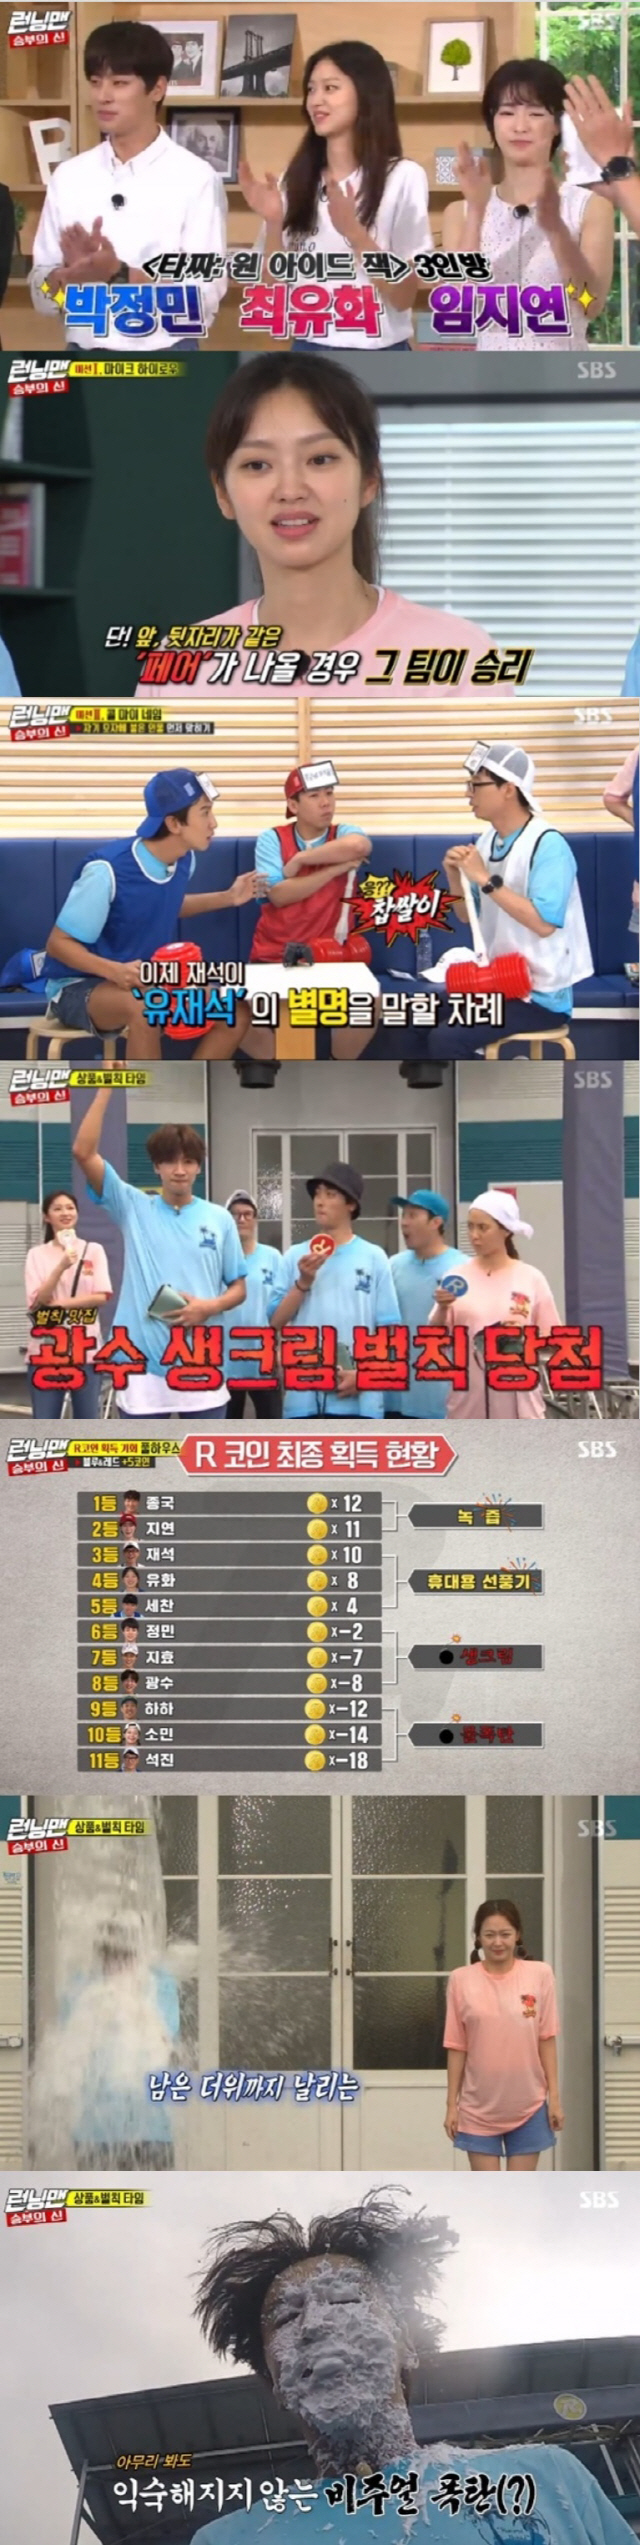 SBS Running Man took the top spot in the same time zone of 2049 target audience rating.The show was decorated with the God of Victory Race and featured actors Park Jung-min, Lim Ji-yeon and Choi Yoo-hwa of the movie Tazza: The High Rollers3: One Eyed Jack, and comedian Ji Suk-jin and actor Jeon So-min appeared under the opening dressing penalty from the beginning.Ji Suk-jin transformed the movie With God to the great king, and Jeon So-min transformed into the direct shot of the movie Saw and laughed.On this day, Race became a more intense race with a solo exhibition, and the last mission covered the results through a full house game.The scene was the highest audience rating of 7.6% in Per minute, which was the best one minute.With a large number of penalties, Lee Kwang-soo received a fresh cream bomb, Haha and Jeon So-min received a water bomb penalty.Meanwhile, Running Man will hold a long-awaited fan meeting Running District at Ewha Womans University Auditorium at 7 p.m. today (26th).